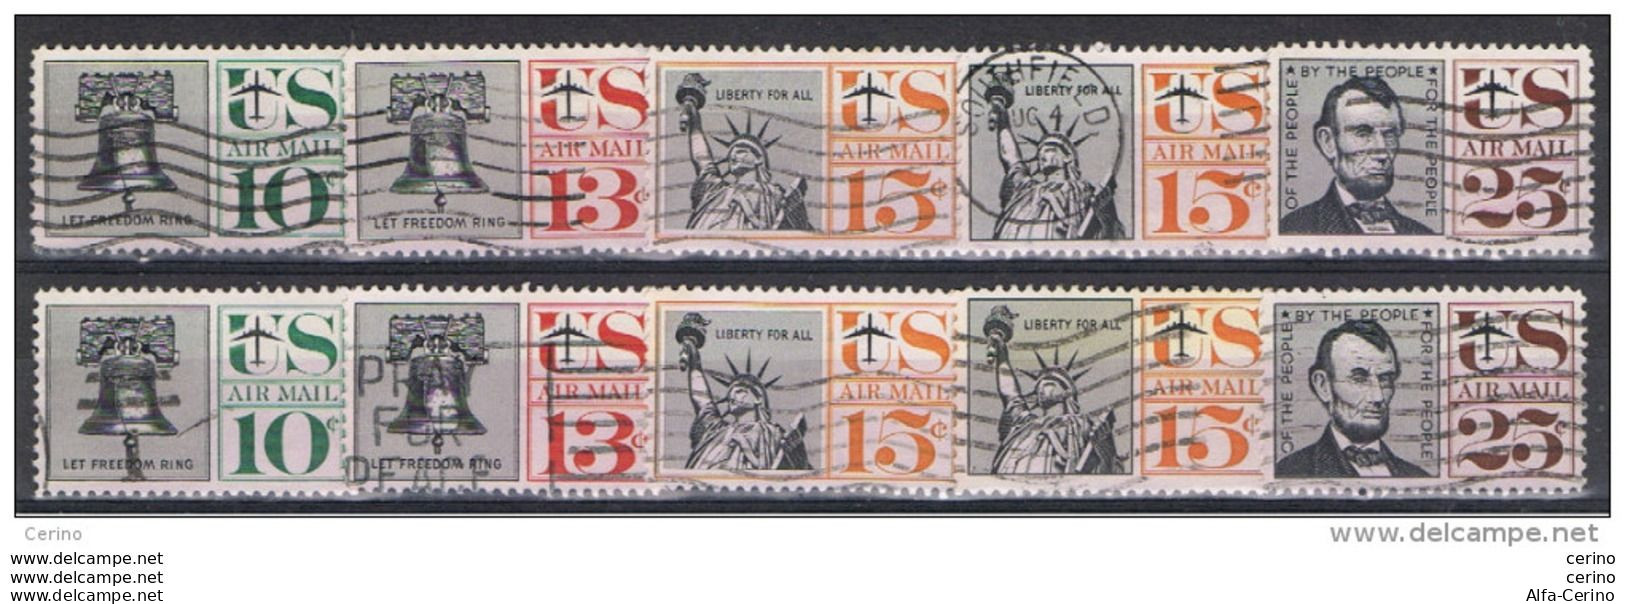 U.S.A.:  1959/61  AIR  MAIL  -  KOMPLET  SET  5  USED  STAMPS  -  REP.  2  EXEMPLARY  -  YV/TELL. 56/60 - 2a. 1941-1960 Usados